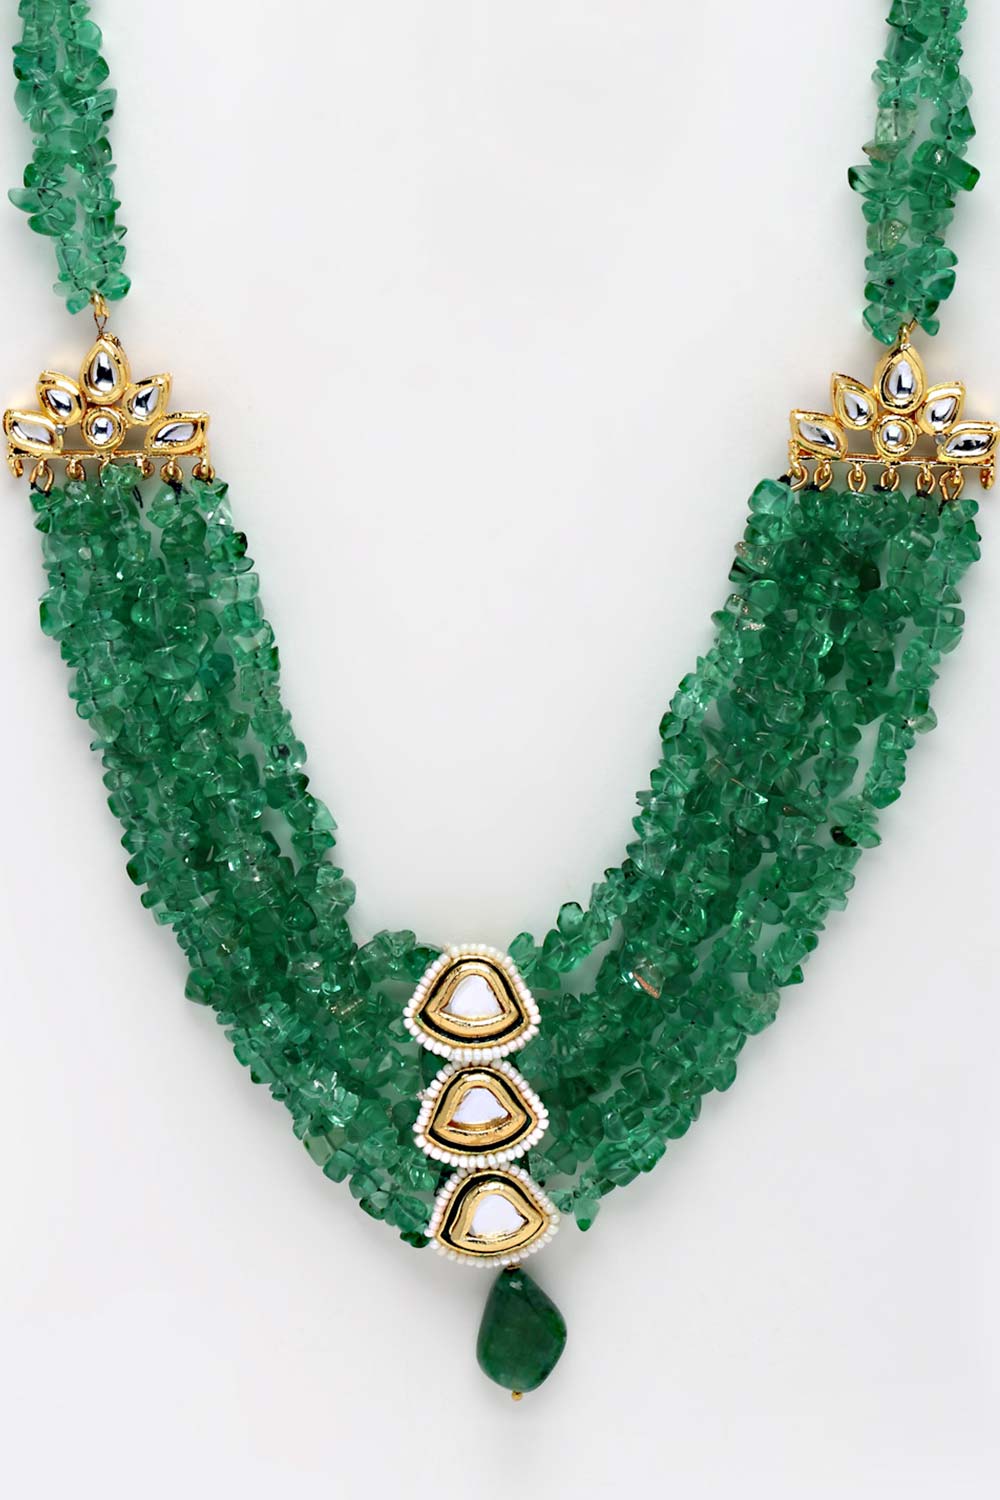 Green And White Gold-Plated Kundan And Pearls Necklace